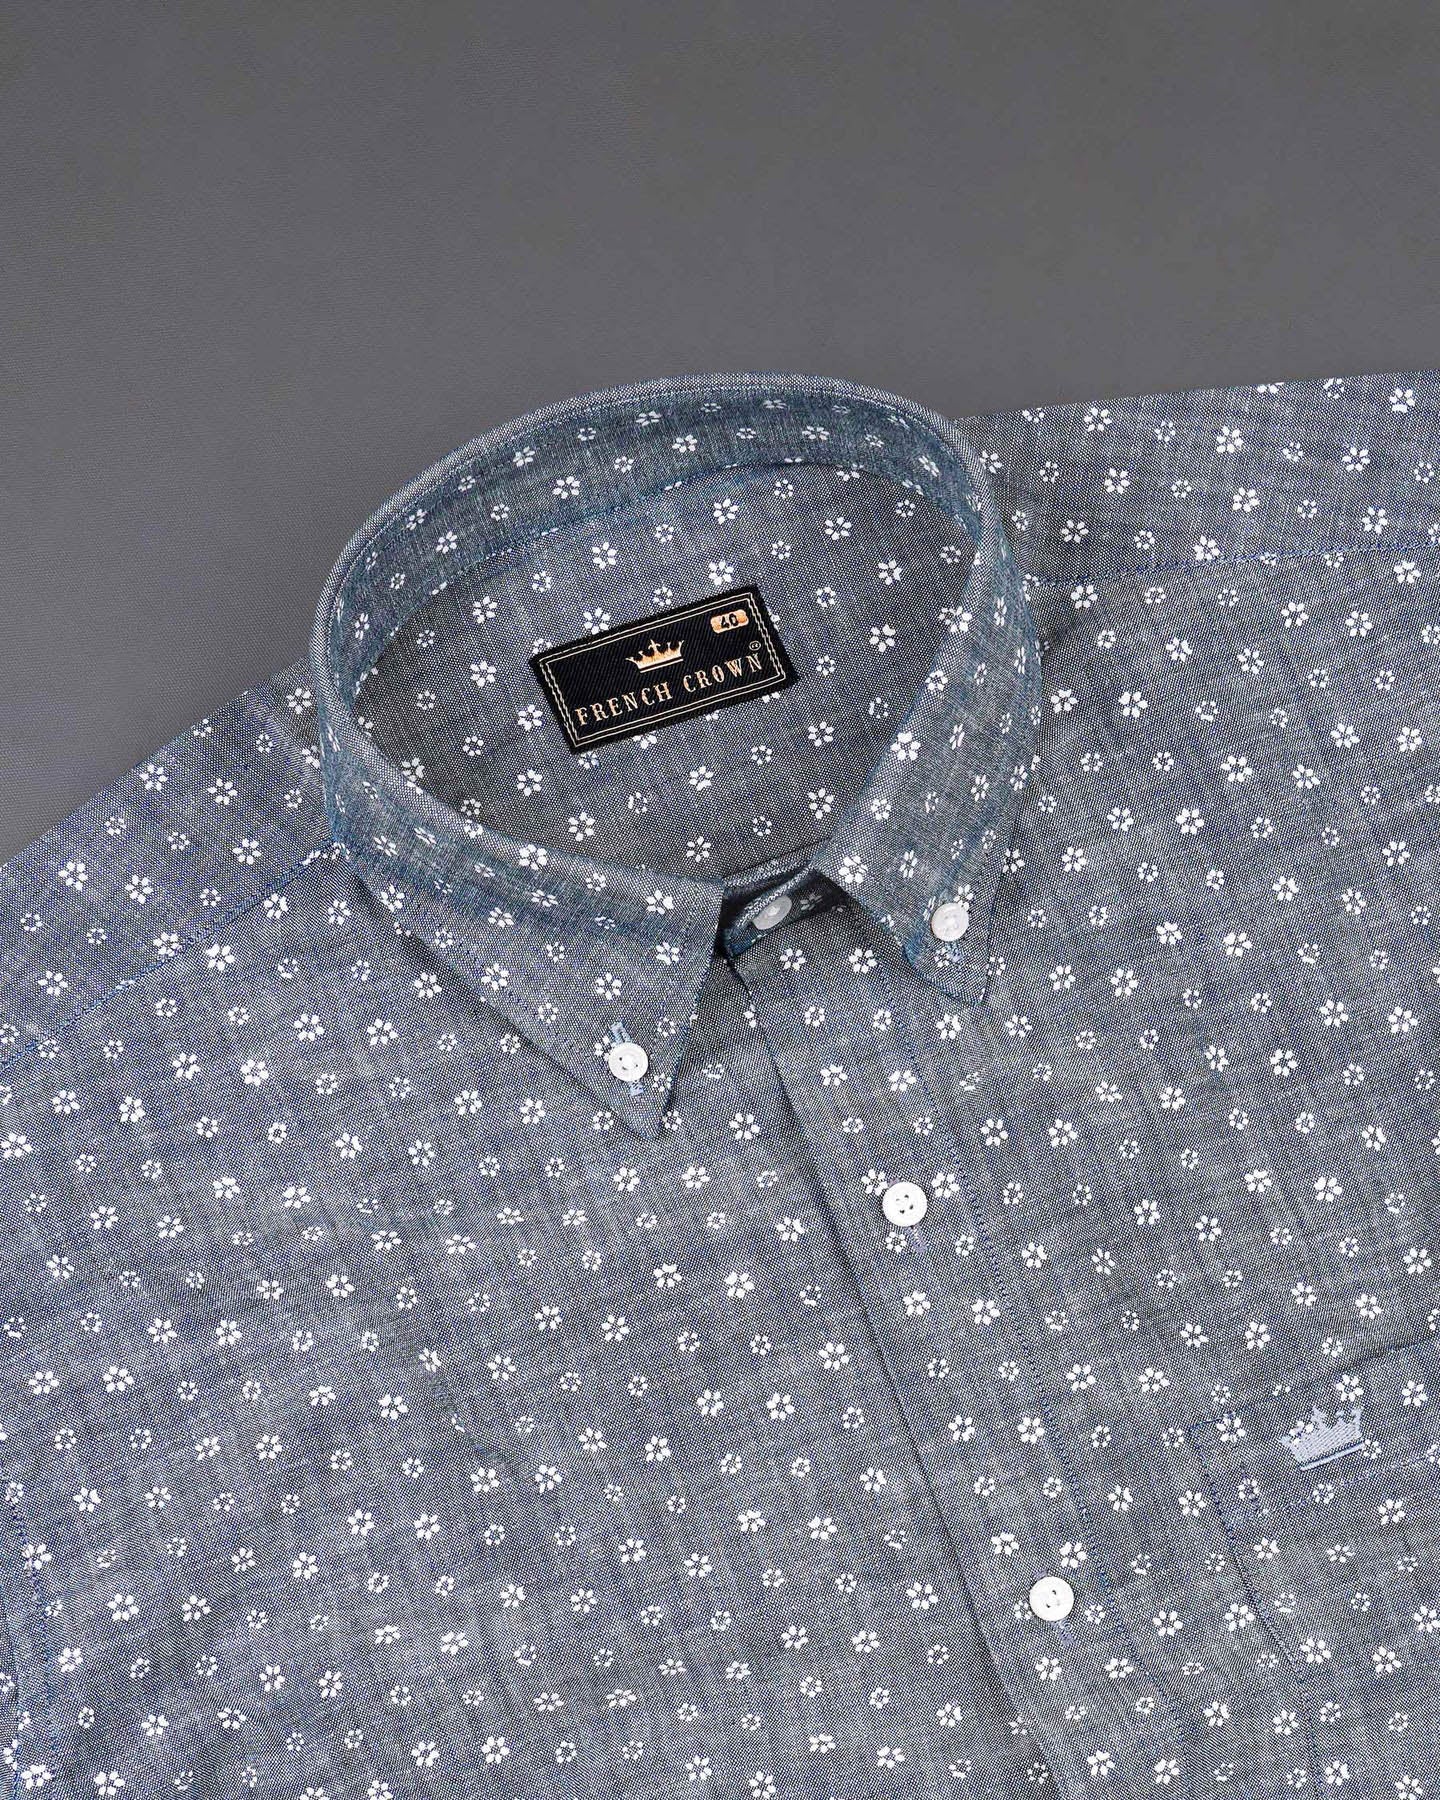 East Bay Gray Ditzy Floral Printed Chambray Premium Cotton Shirt 7984-BD-38, 7984-BD-H-38, 7984-BD-39, 7984-BD-H-39, 7984-BD-40, 7984-BD-H-40, 7984-BD-42, 7984-BD-H-42, 7984-BD-44, 7984-BD-H-44, 7984-BD-46, 7984-BD-H-46, 7984-BD-48, 7984-BD-H-48, 7984-BD-50, 7984-BD-H-50, 7984-BD-52, 7984-BD-H-52